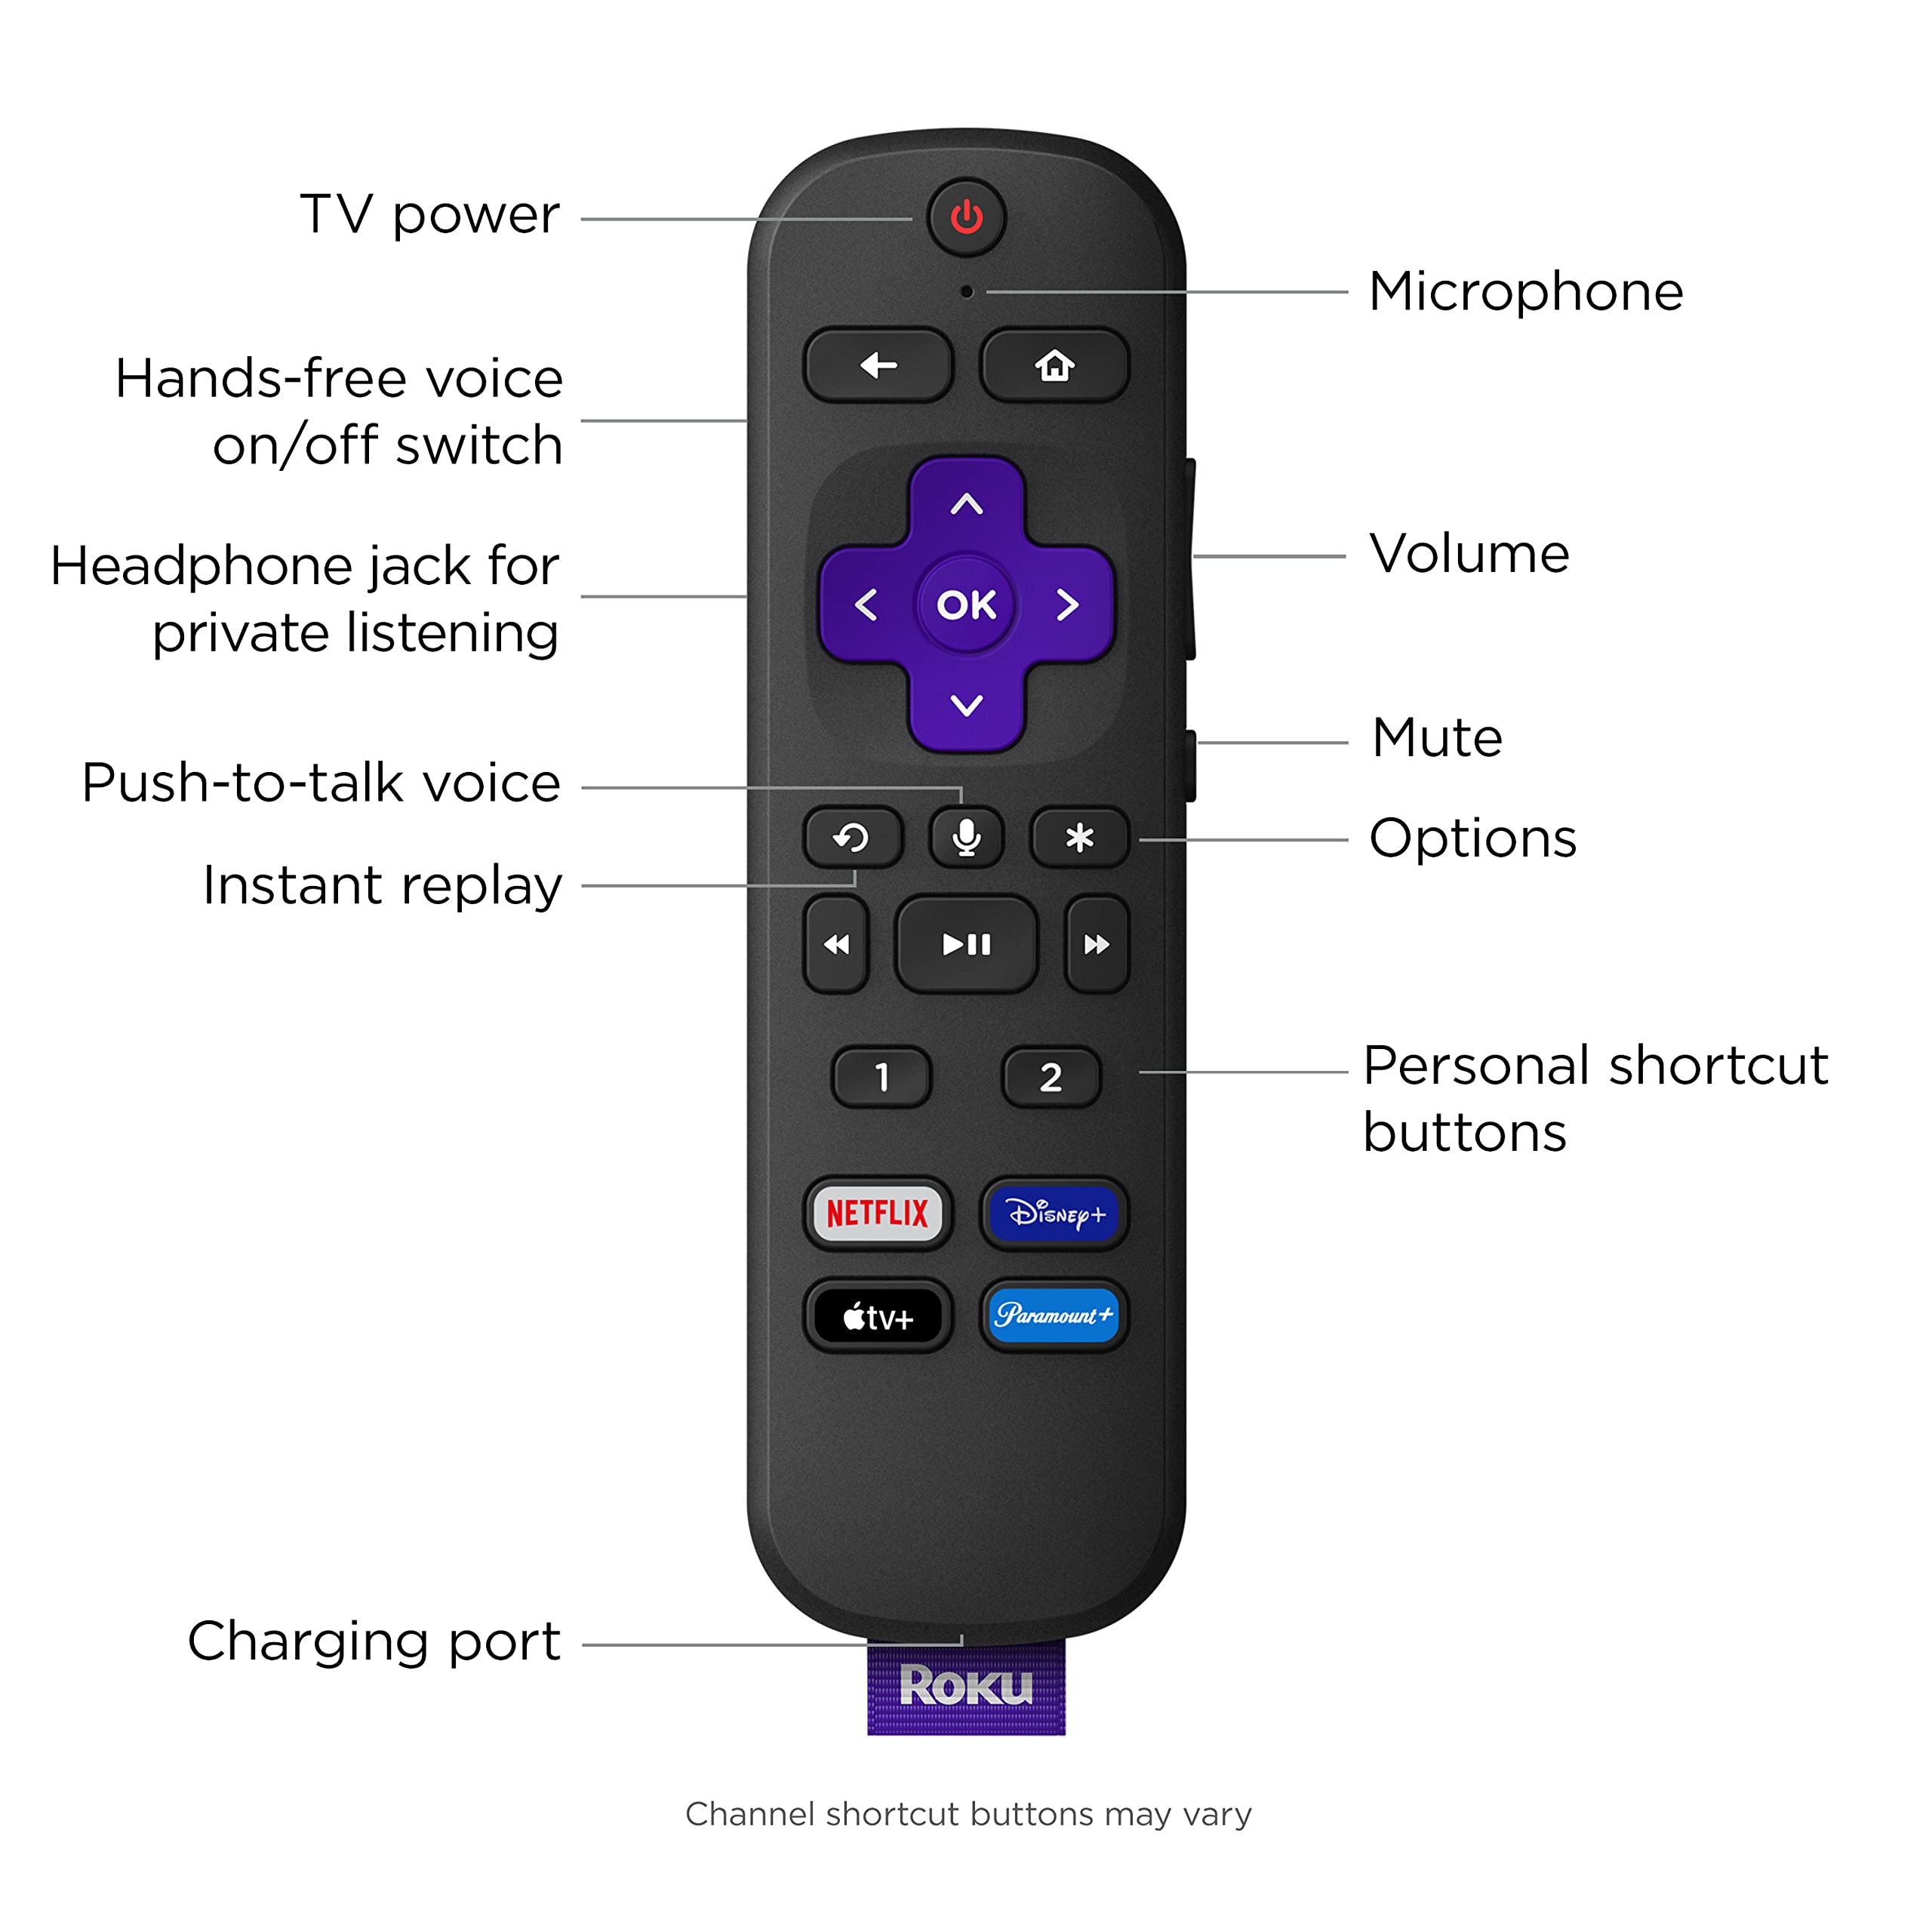 Roku Streaming Stick 4K+ | Portable Roku Streaming Device 4K/HDR/Dolby Vision, Rechargeable Roku Voice Remote Pro, Hands-Free Controls, Lost Remote Finder, Free & Live TV